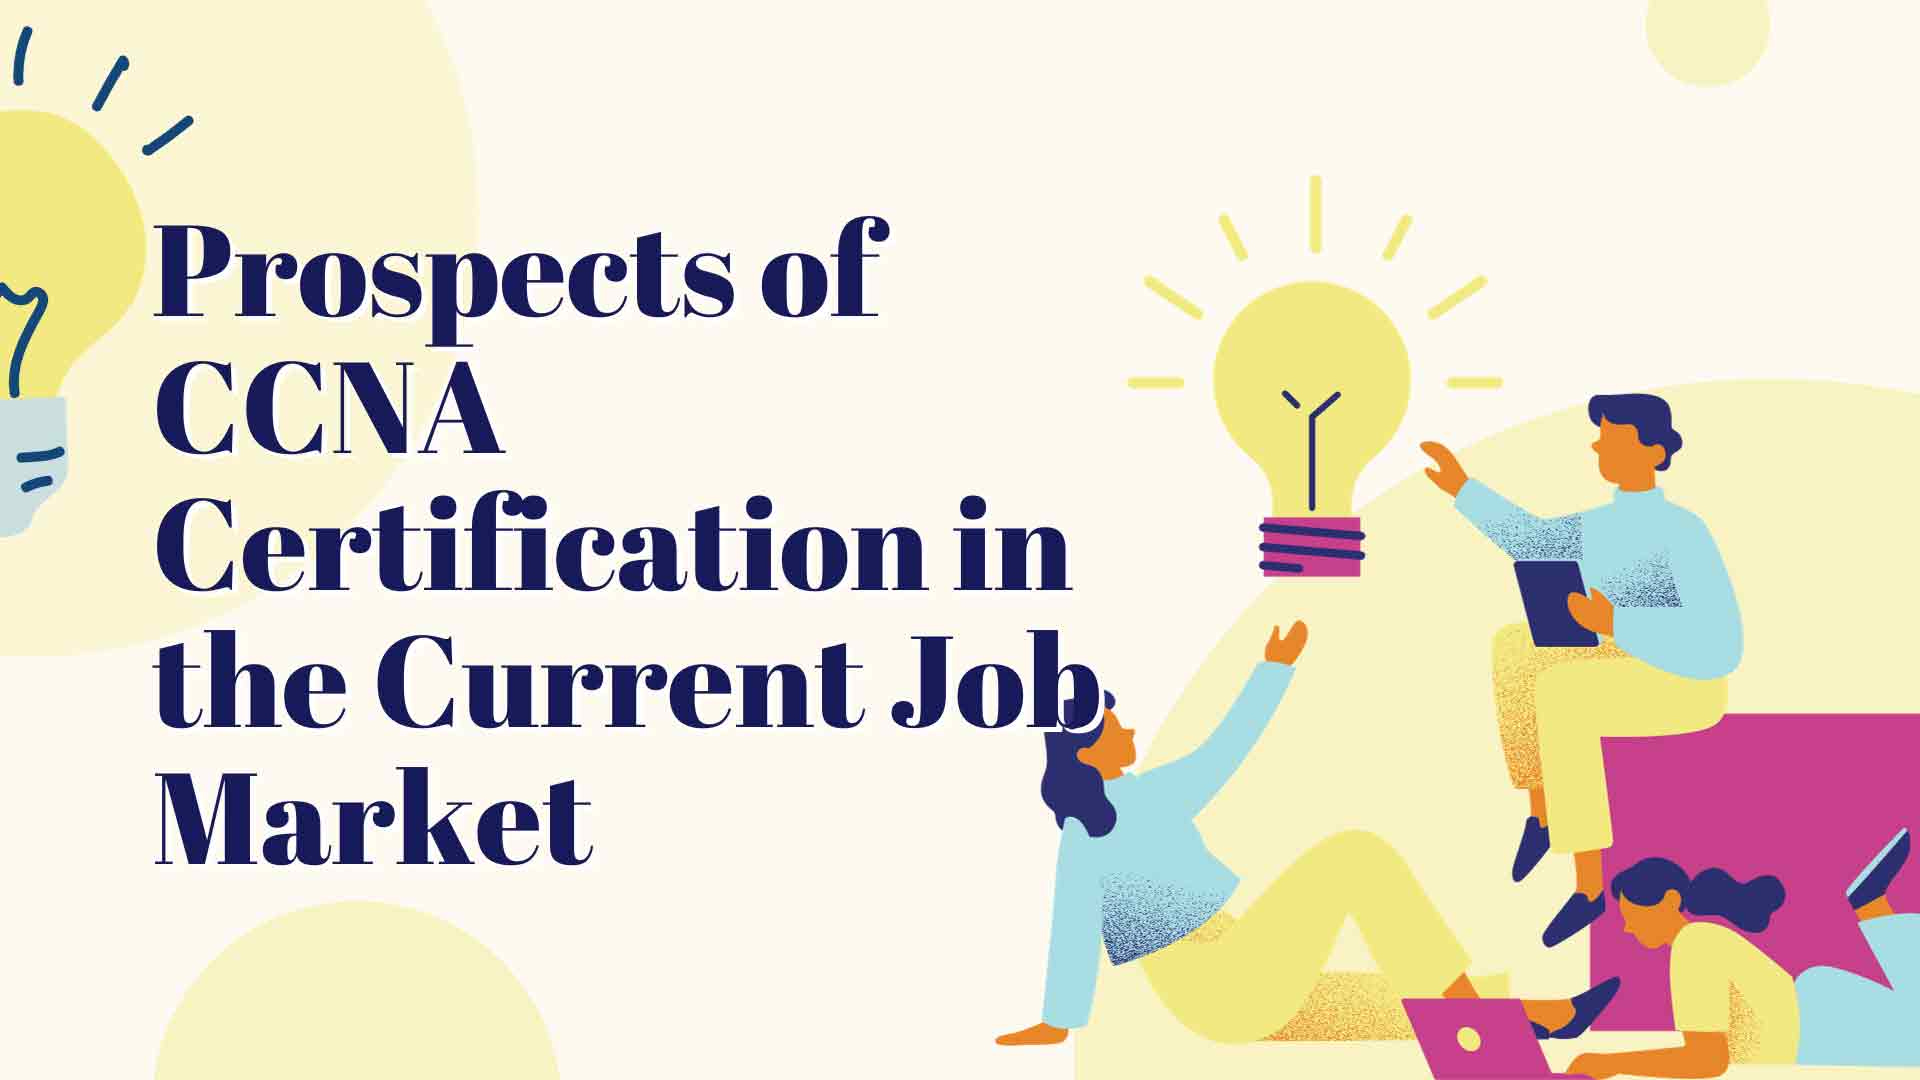 Evaluating the Relevance and Prospects of CCNA Certification in the Current Job Market